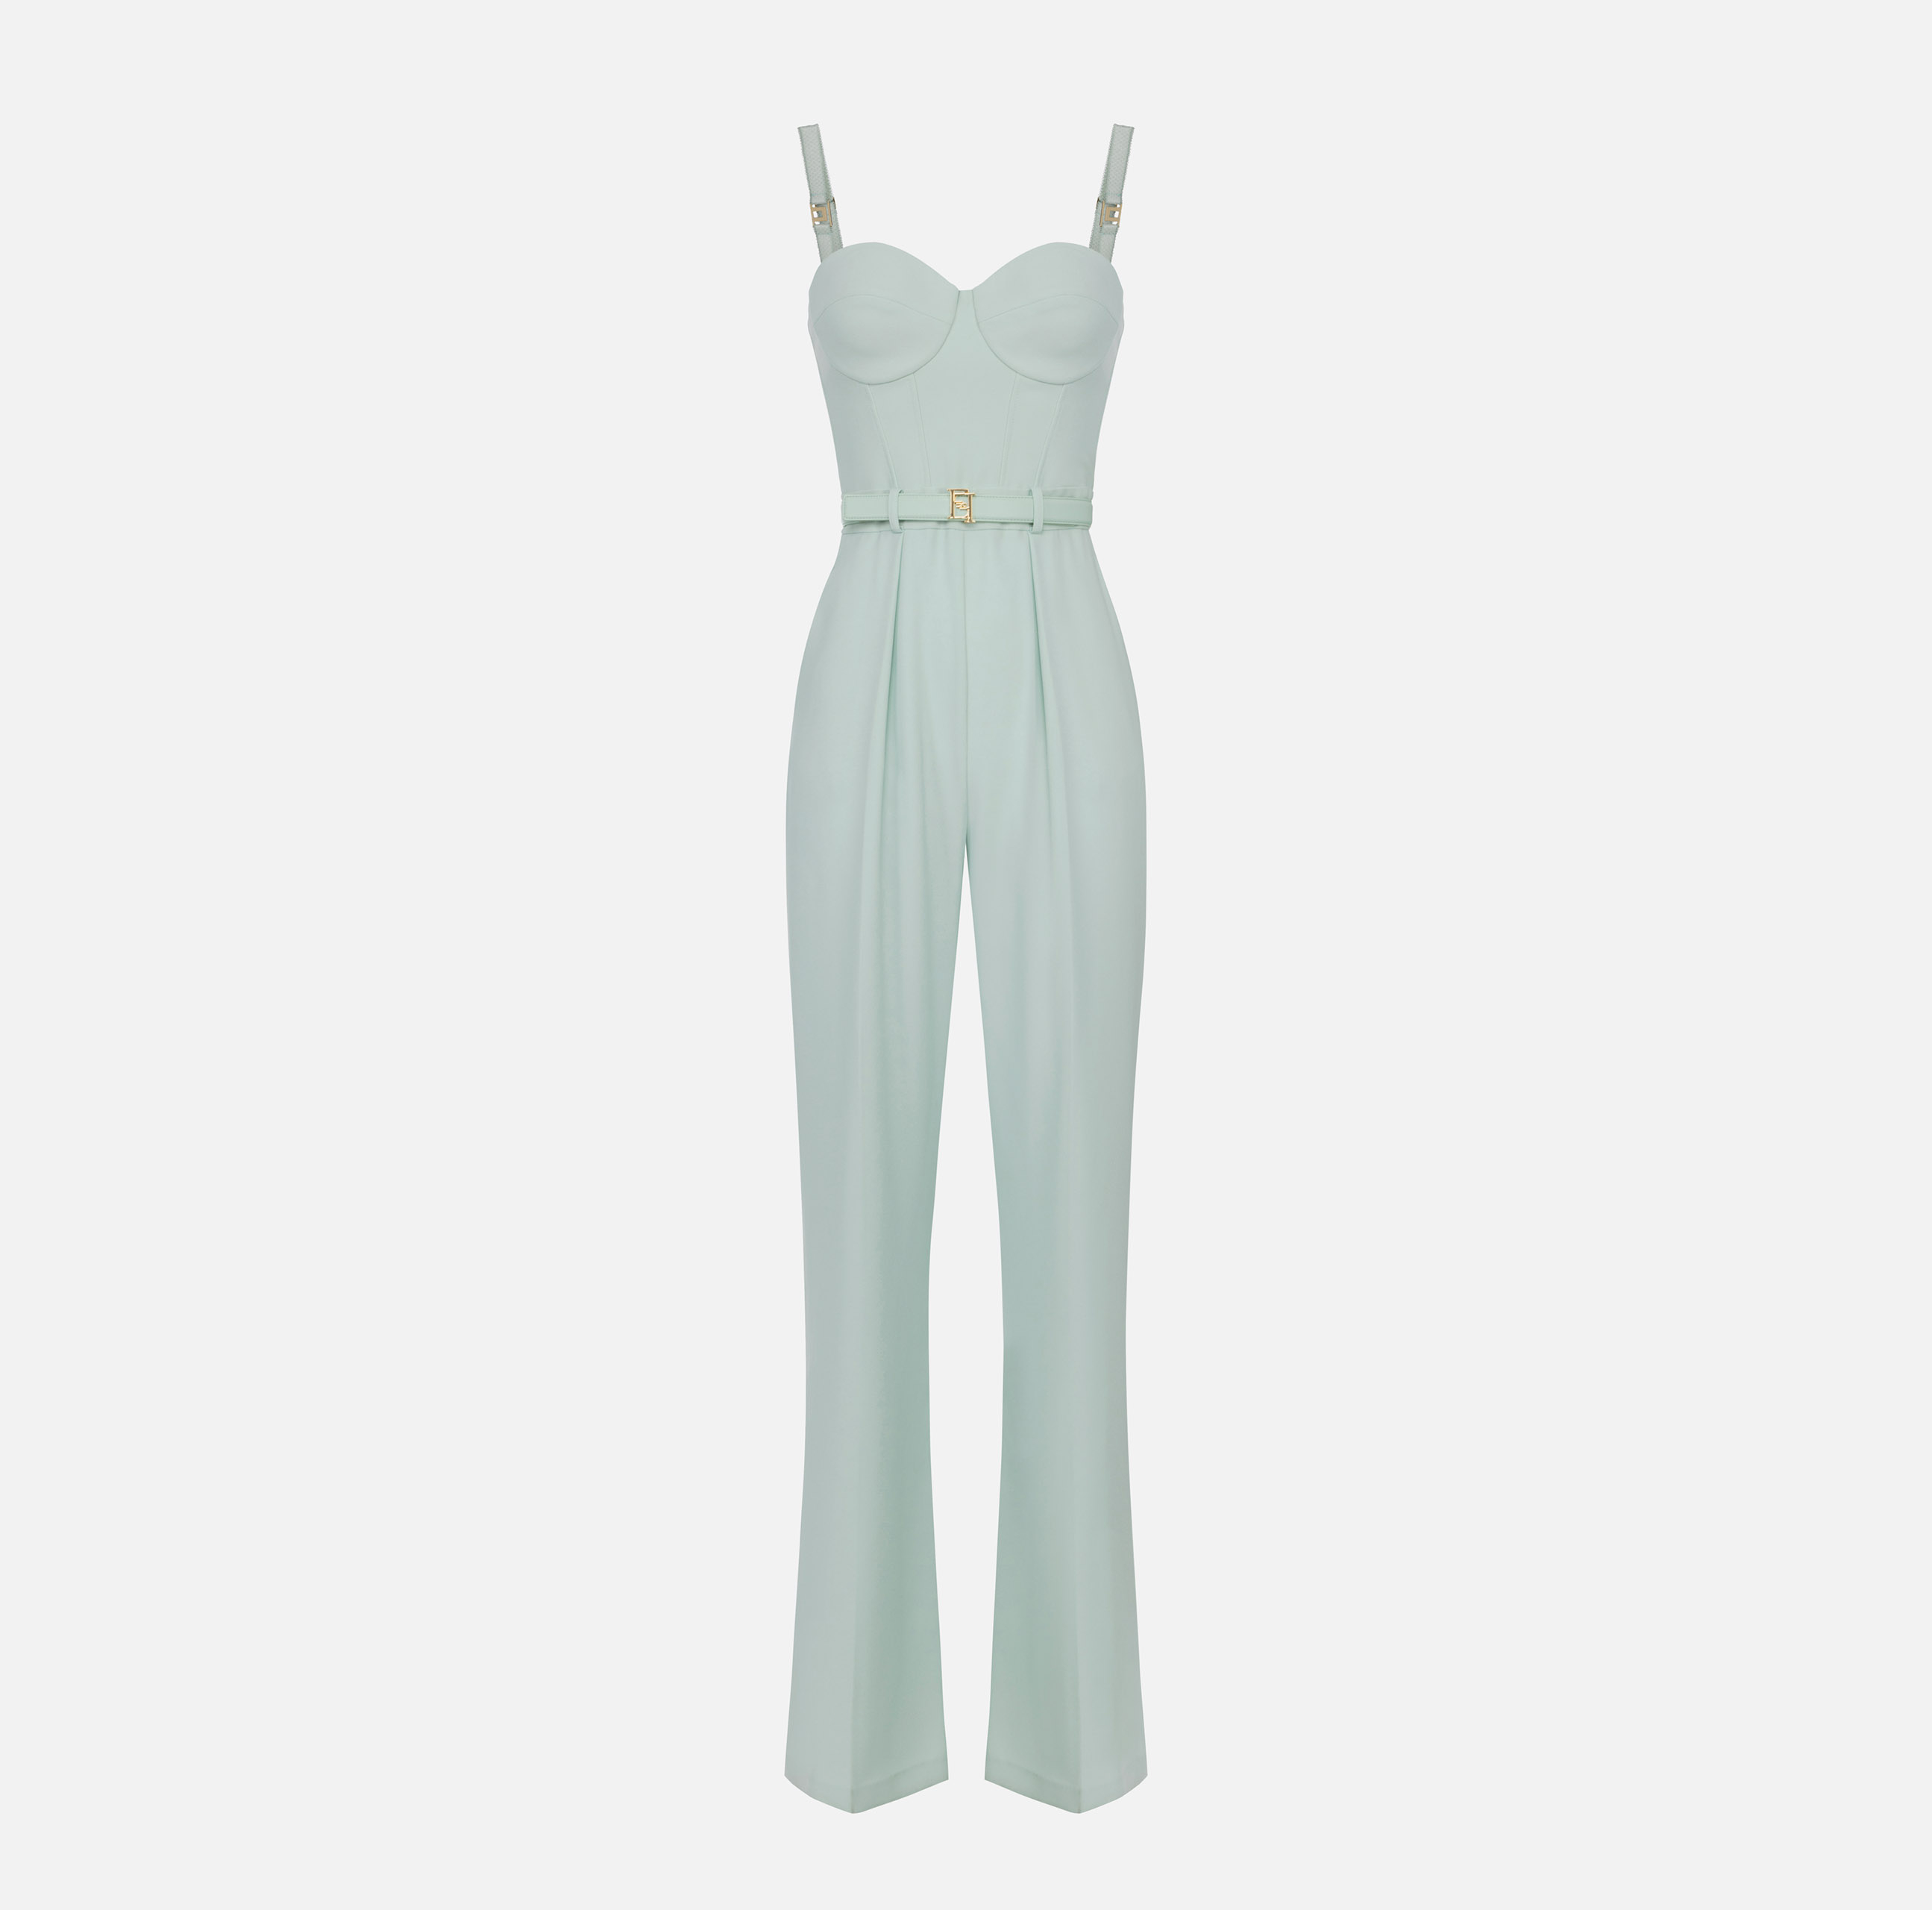 Jumpsuit in crêpe fabric with bustier top - ABBIGLIAMENTO - Elisabetta Franchi